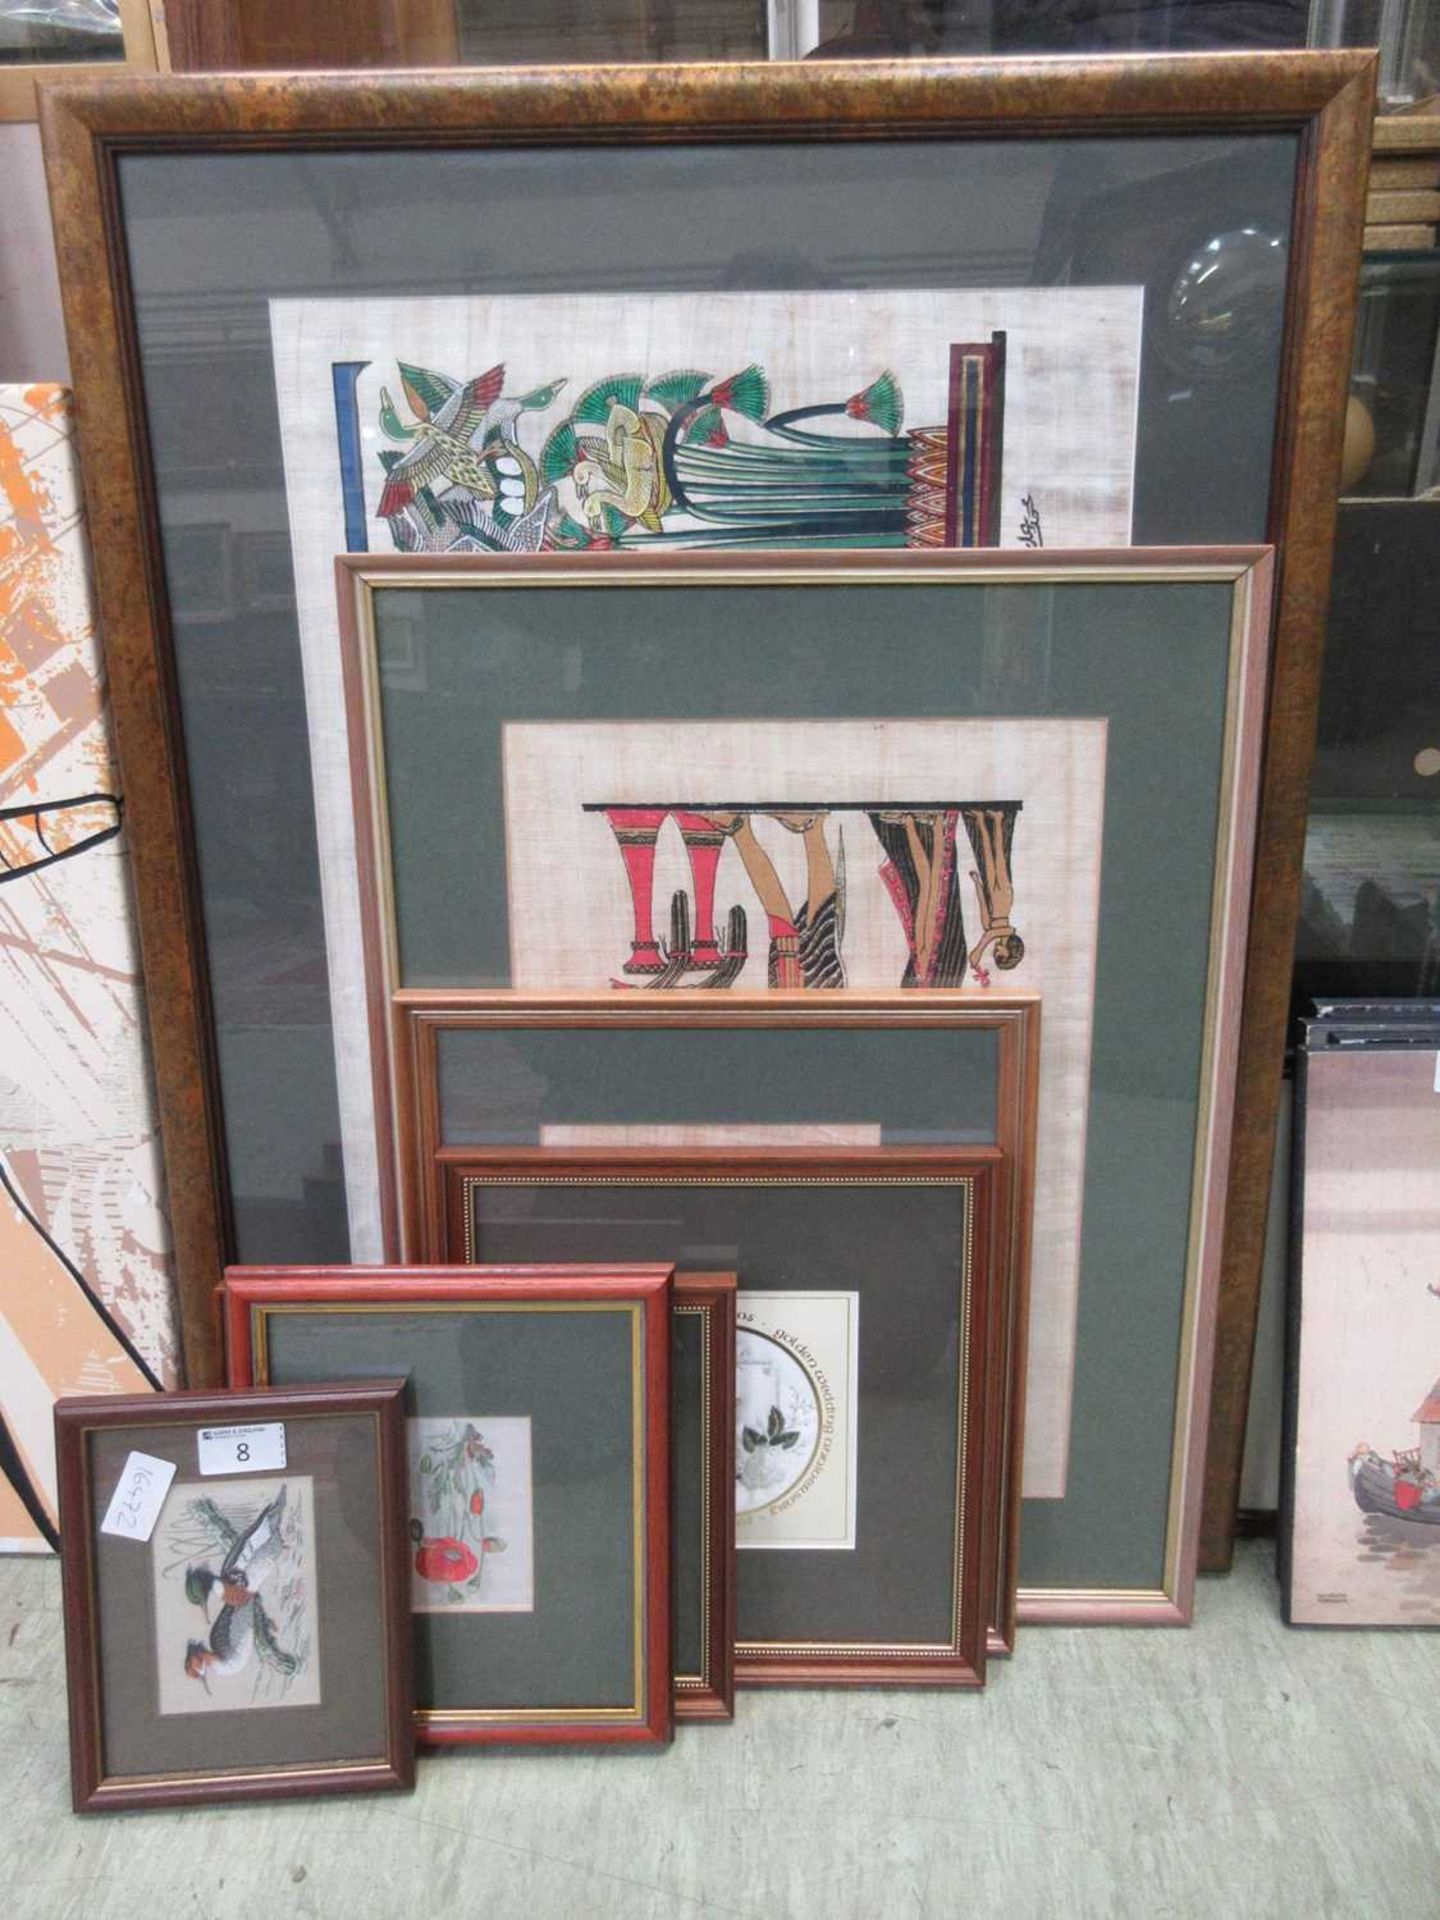 Artworks to include Cash's silks, Egyptian papyrus paintings, needlework, etc